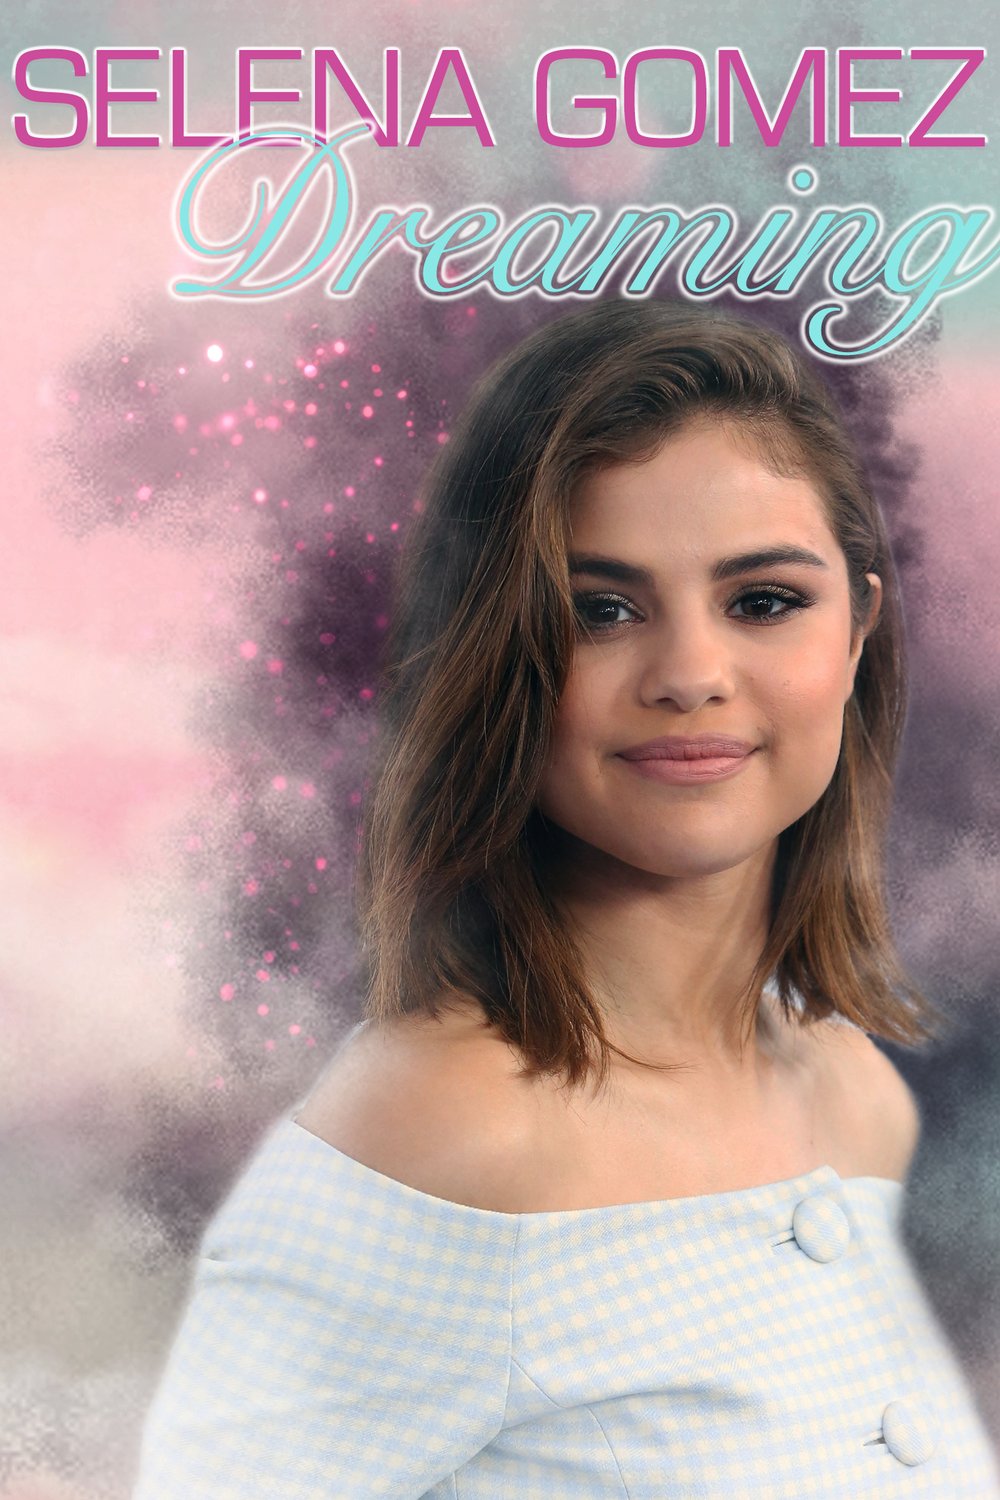 Poster of the movie Selena Gomez: Dreaming